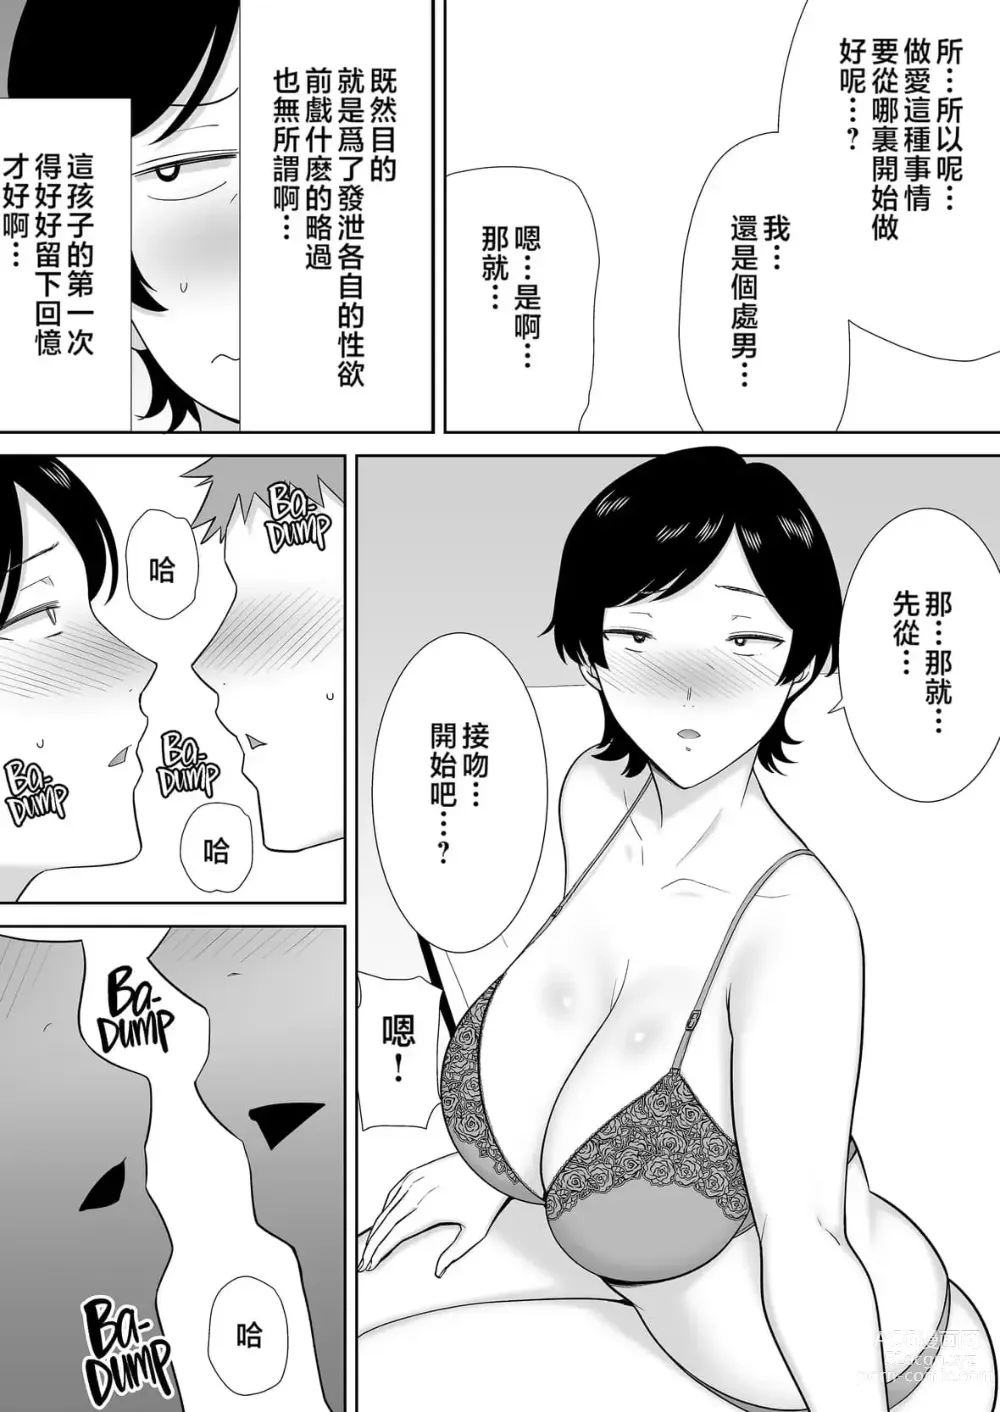 Page 21 of doujinshi even mom want a litle lovin